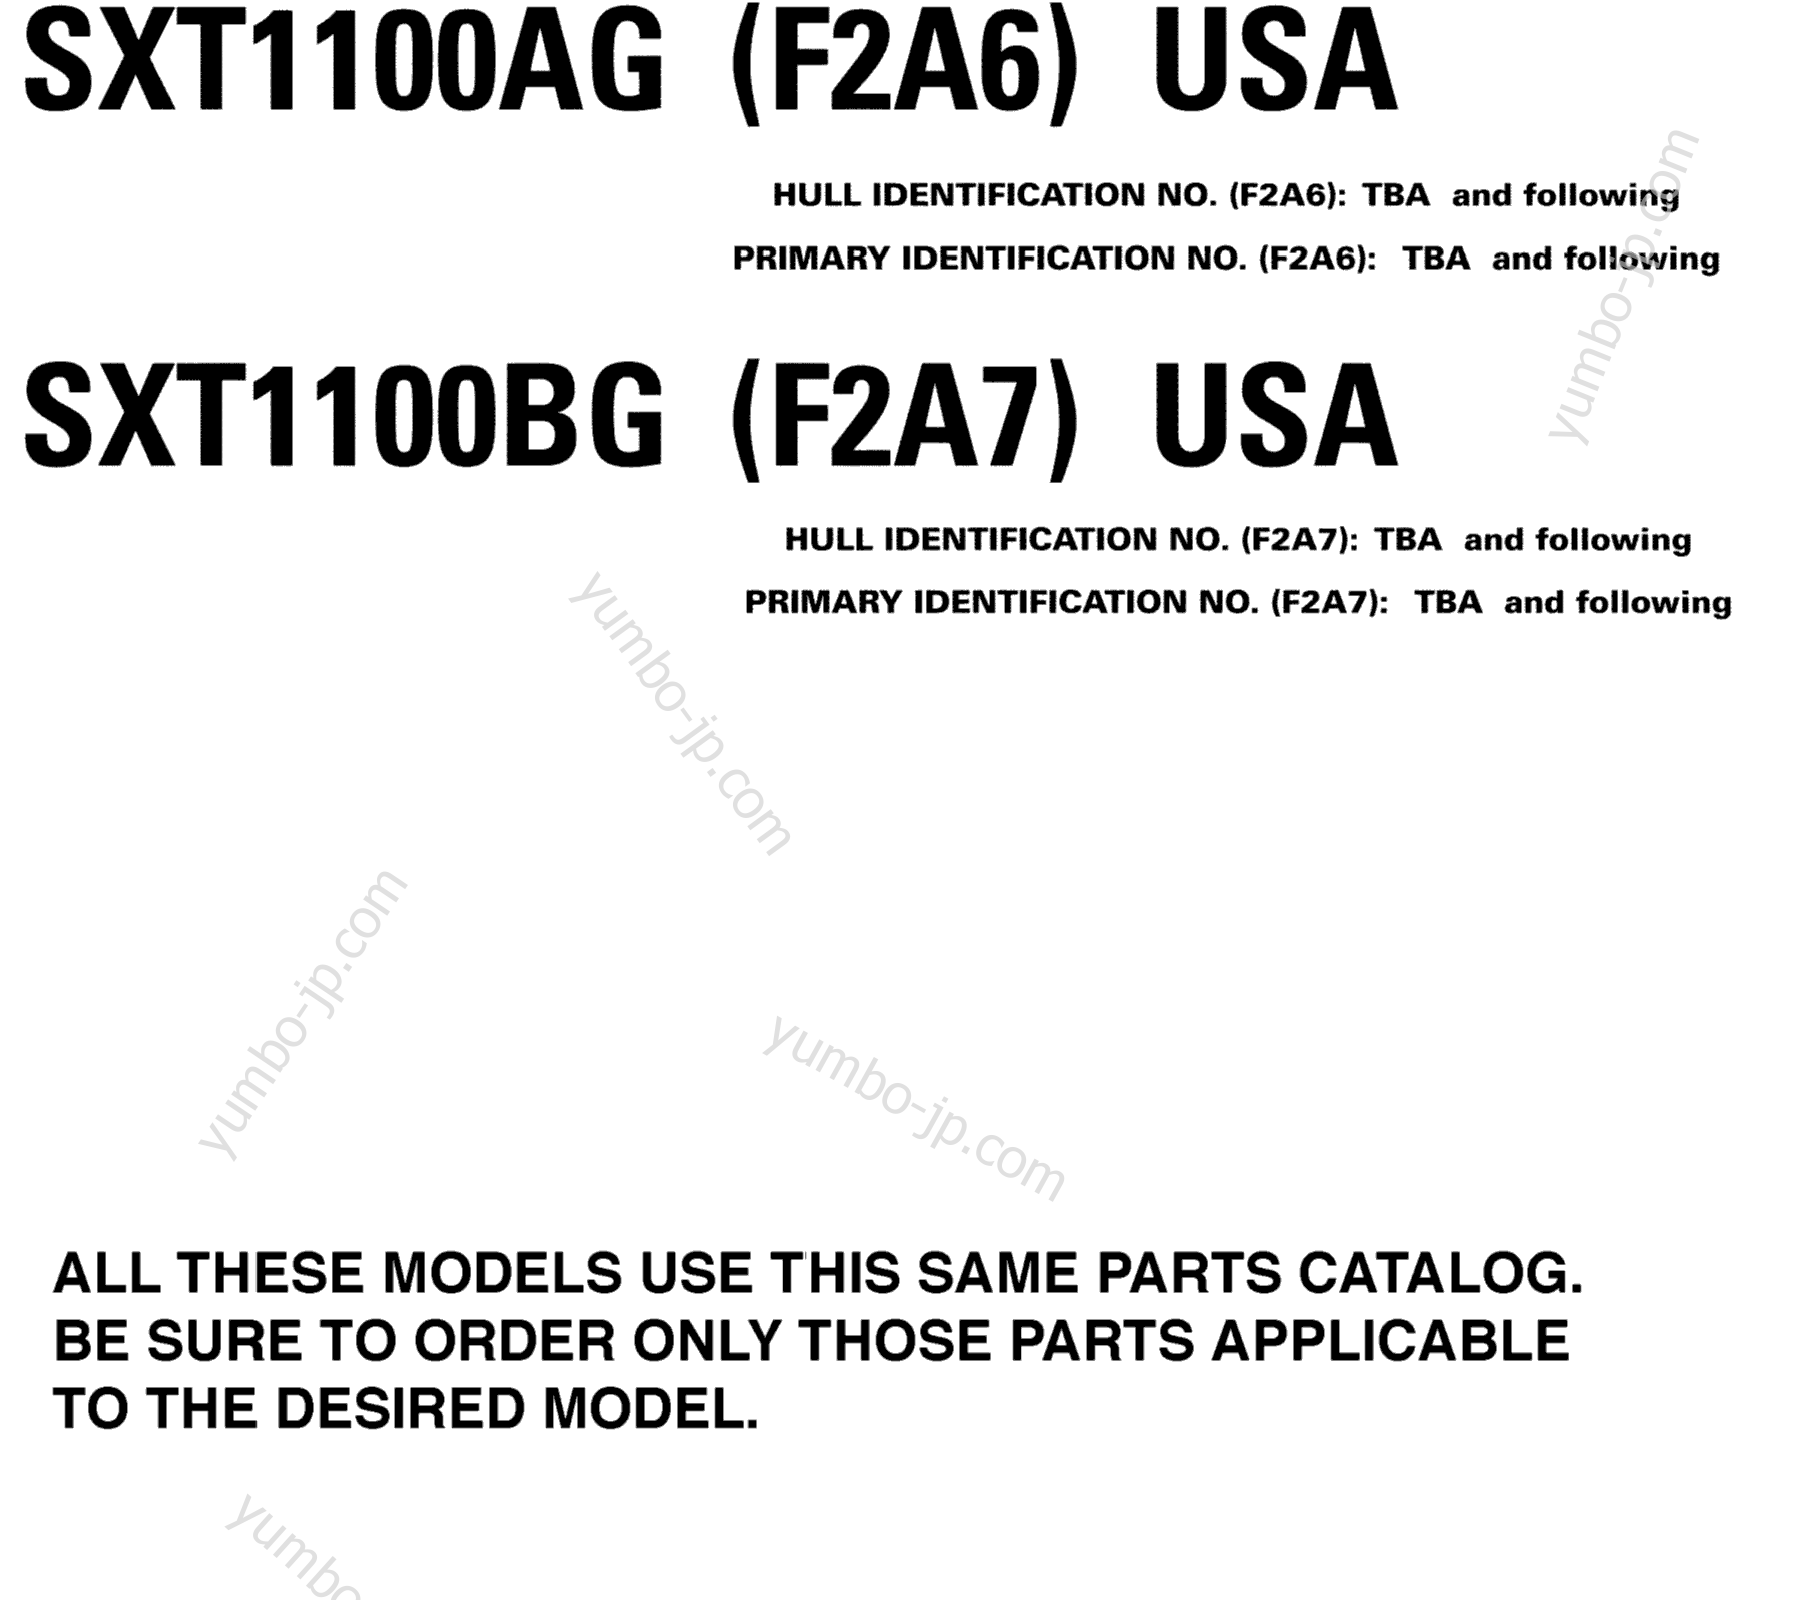 Models In This Catalog for boats YAMAHA AR230 HIGH OUTPUT (SXT1100BG) 2008 year